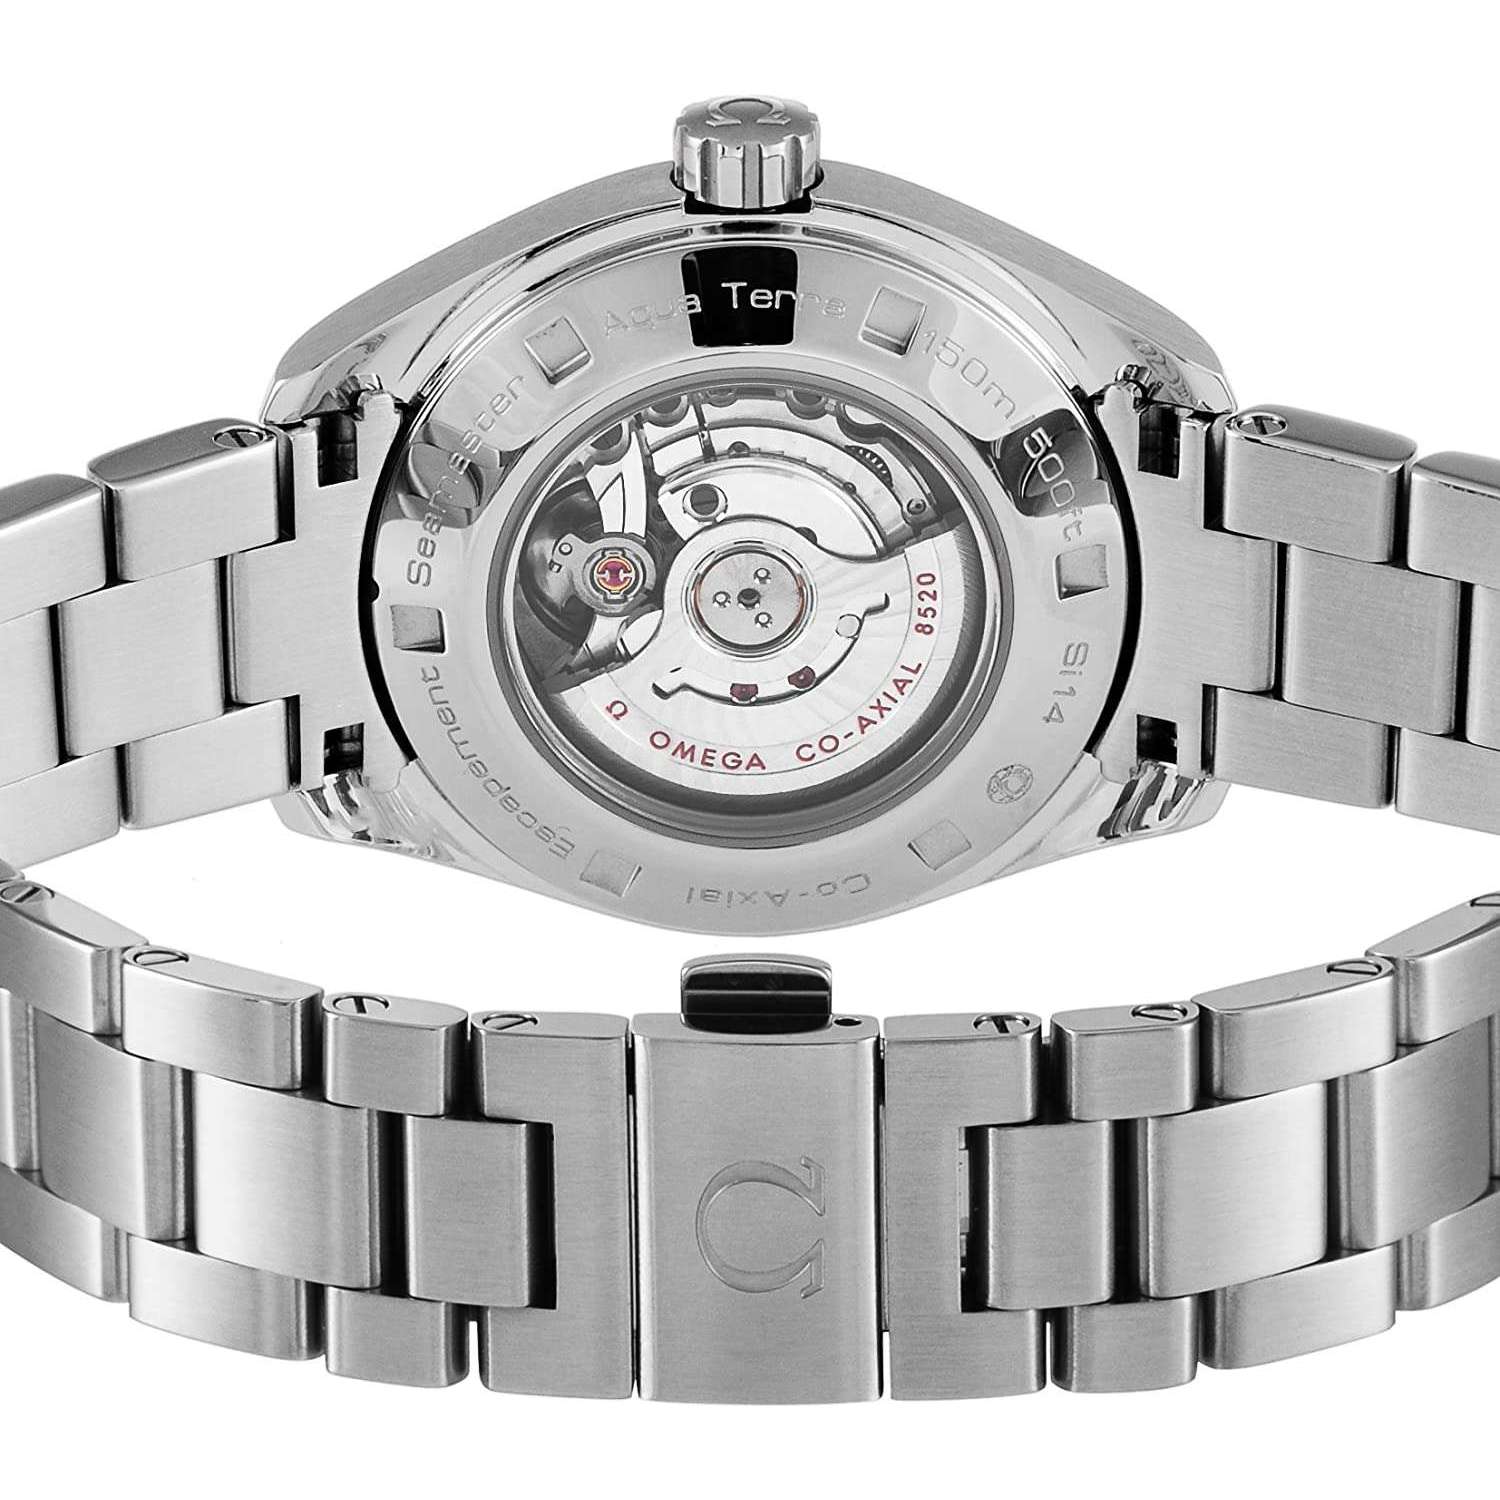 ROOK JAPAN:OMEGA SEAMASTER CO-AXIAL CHRONOMETER 34 MM MEN WATCH 231.10.34.20.01.001,Luxury Watch,Omega